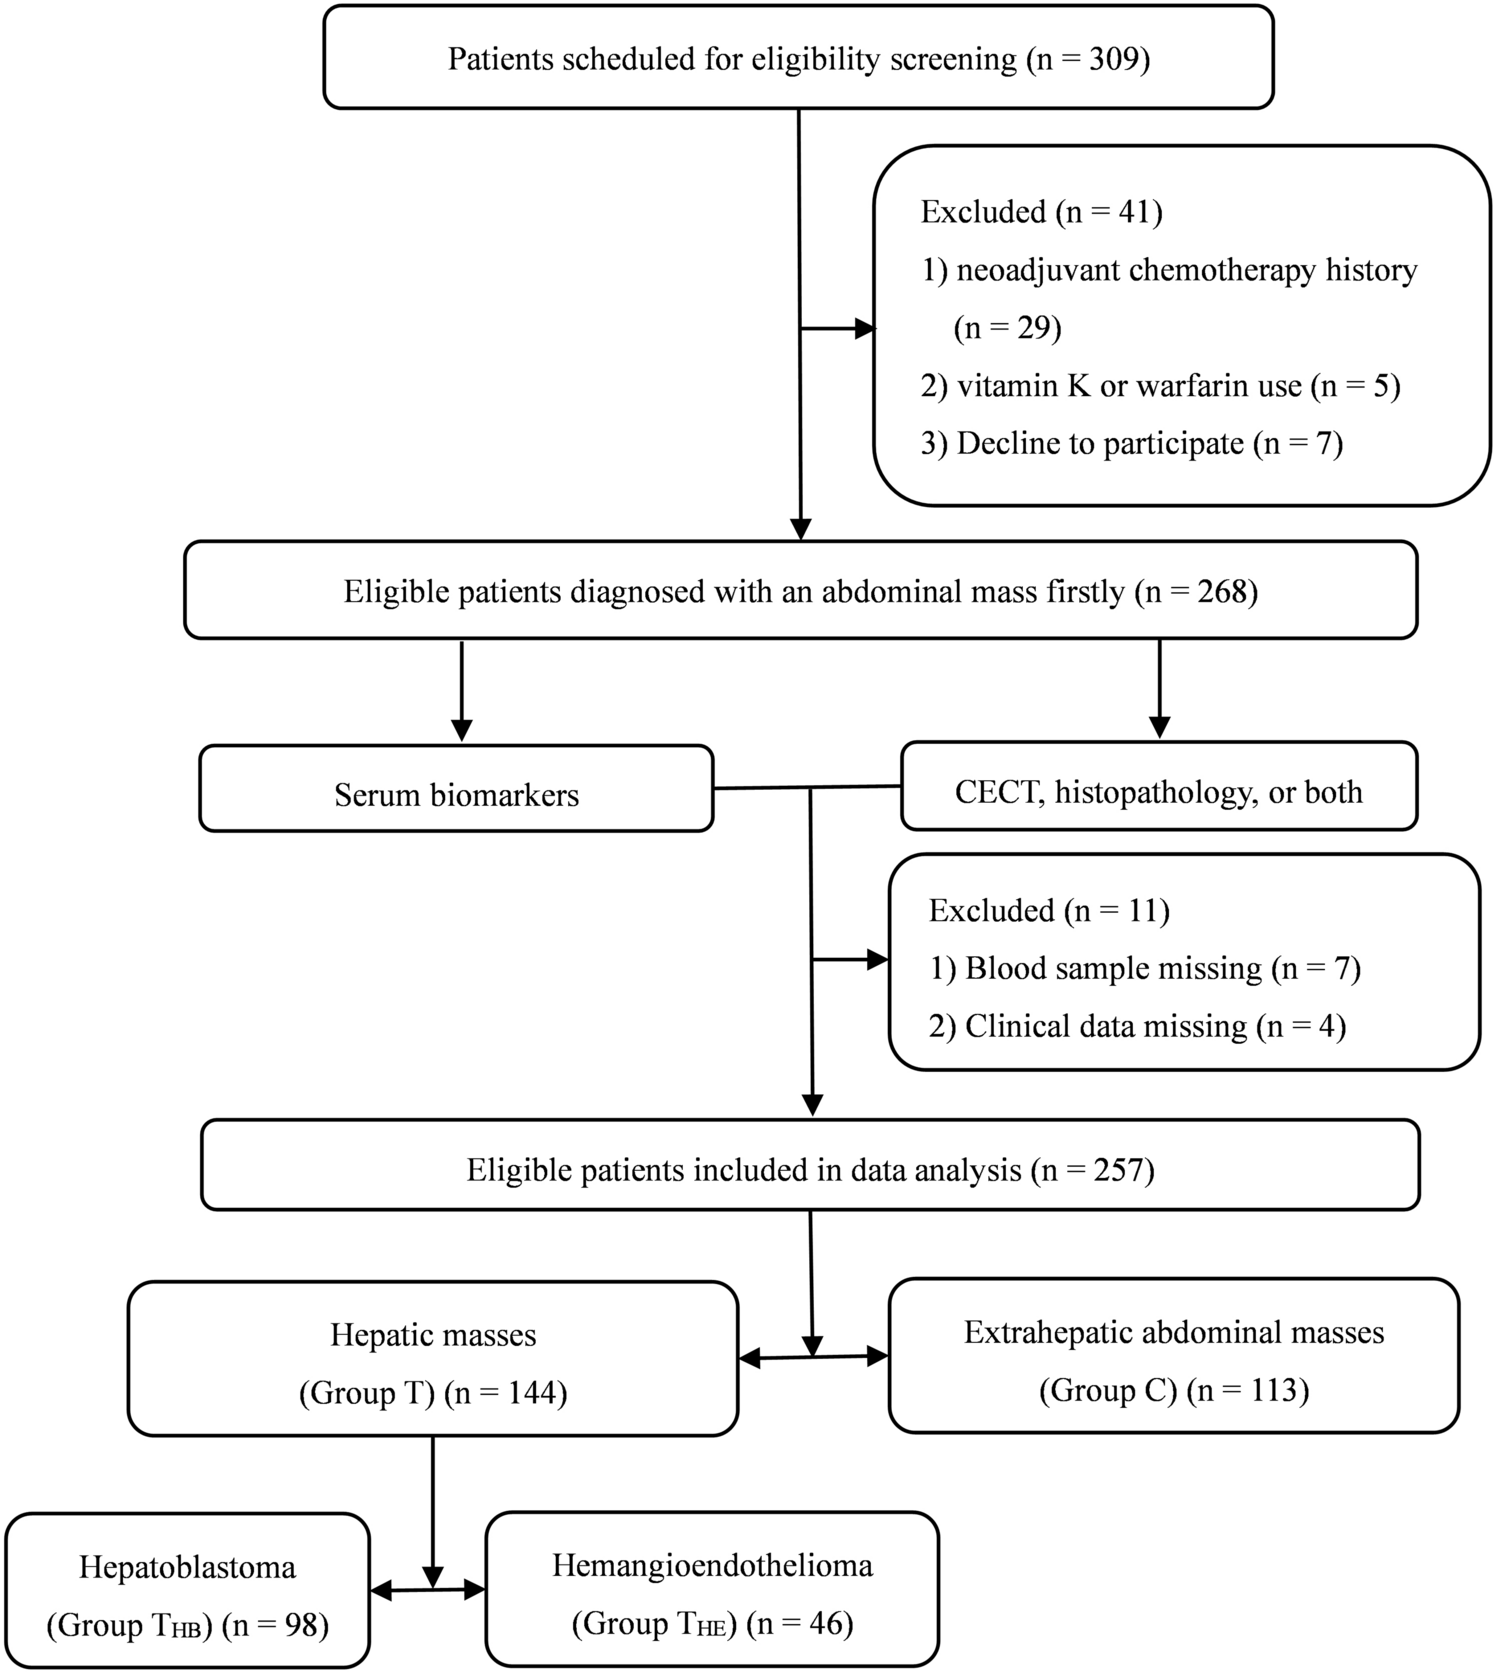 PIVKA-II combined with alpha-fetoprotein for the diagnostic value of hepatic tumors in children: a multicenter, prospective observational study